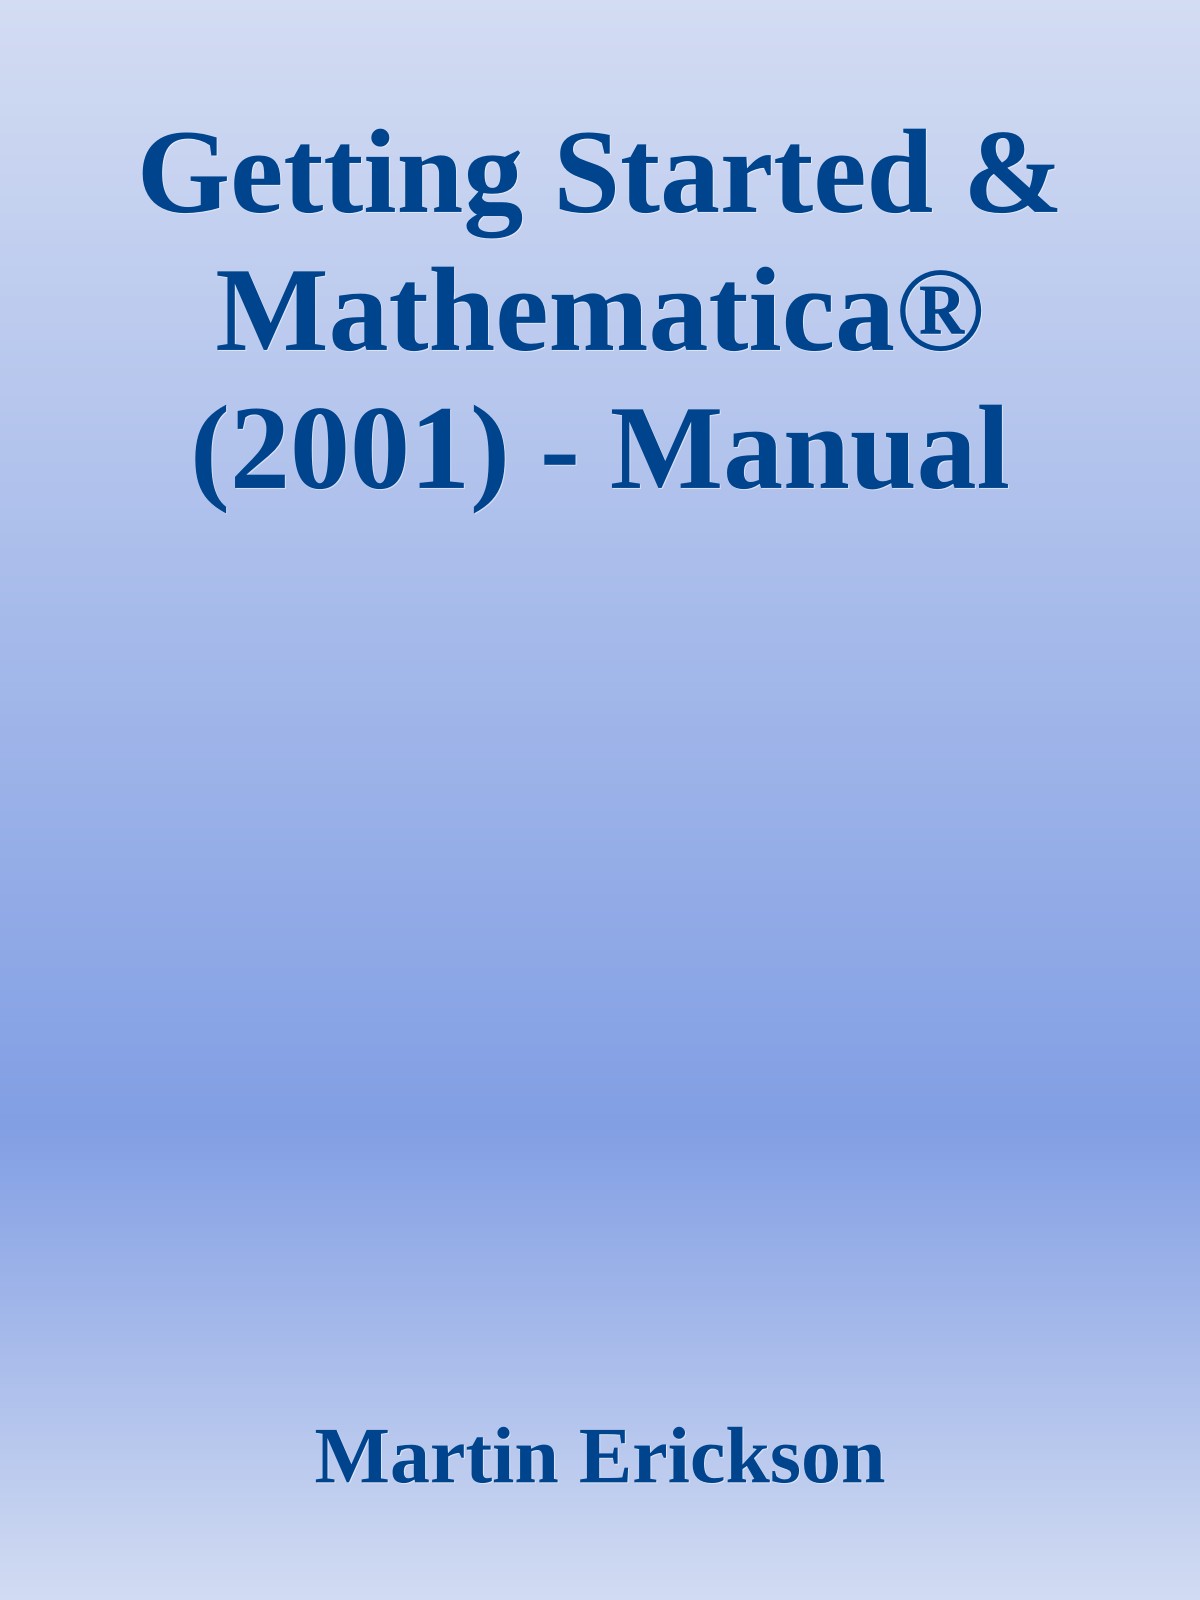 Getting Started & Mathematica® (2001) - Manual